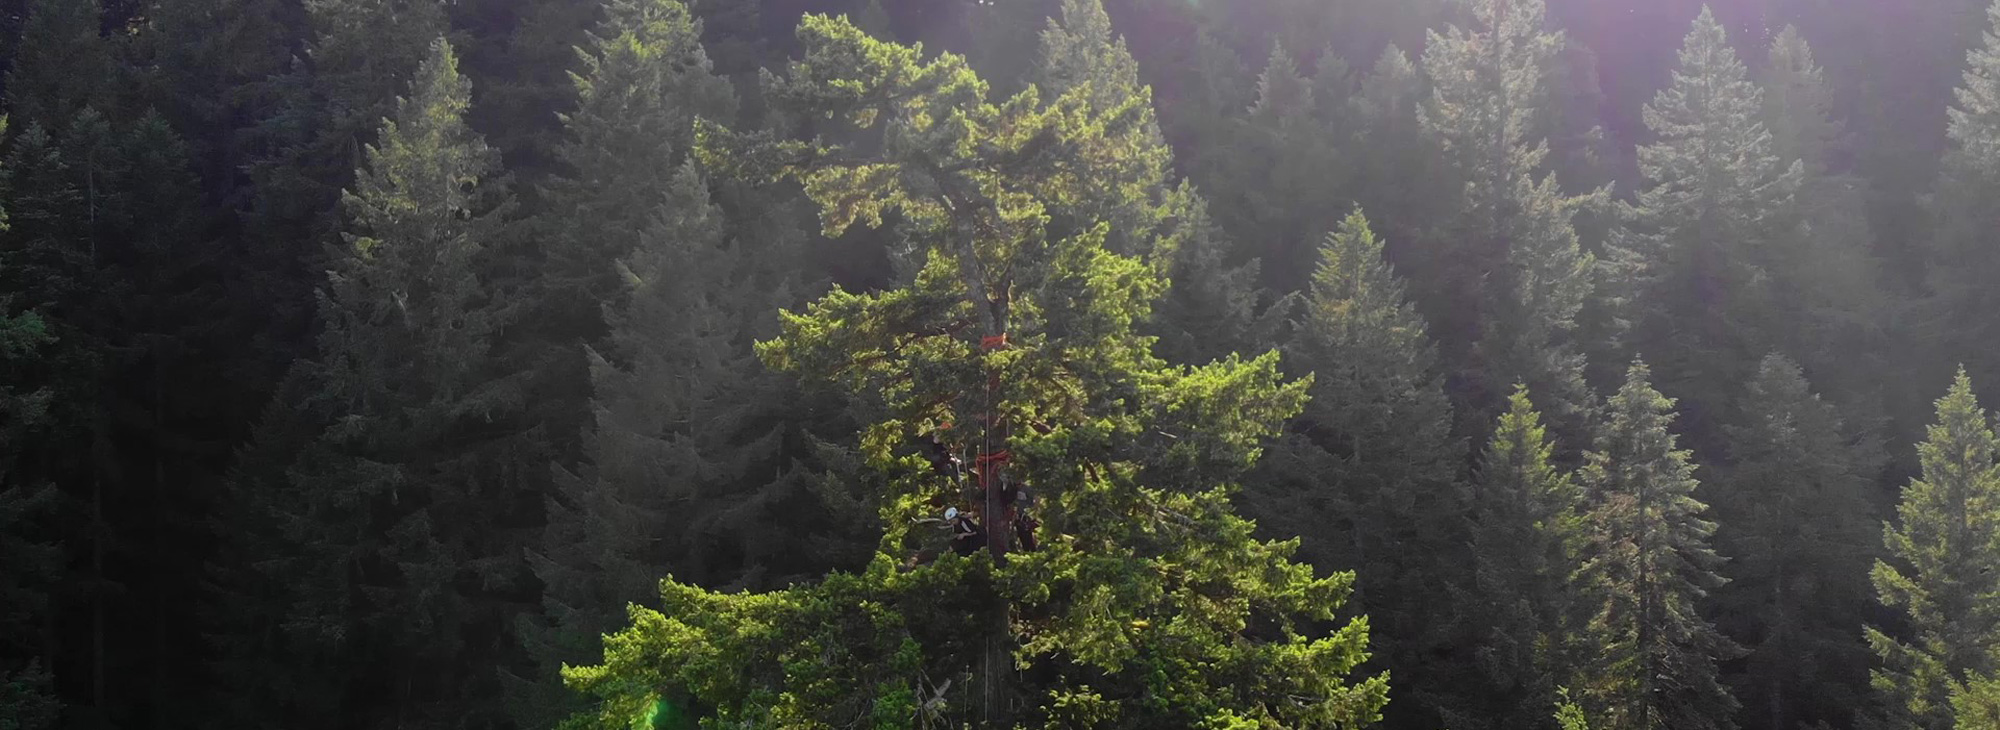 climbers wearing harnesses in tall tree